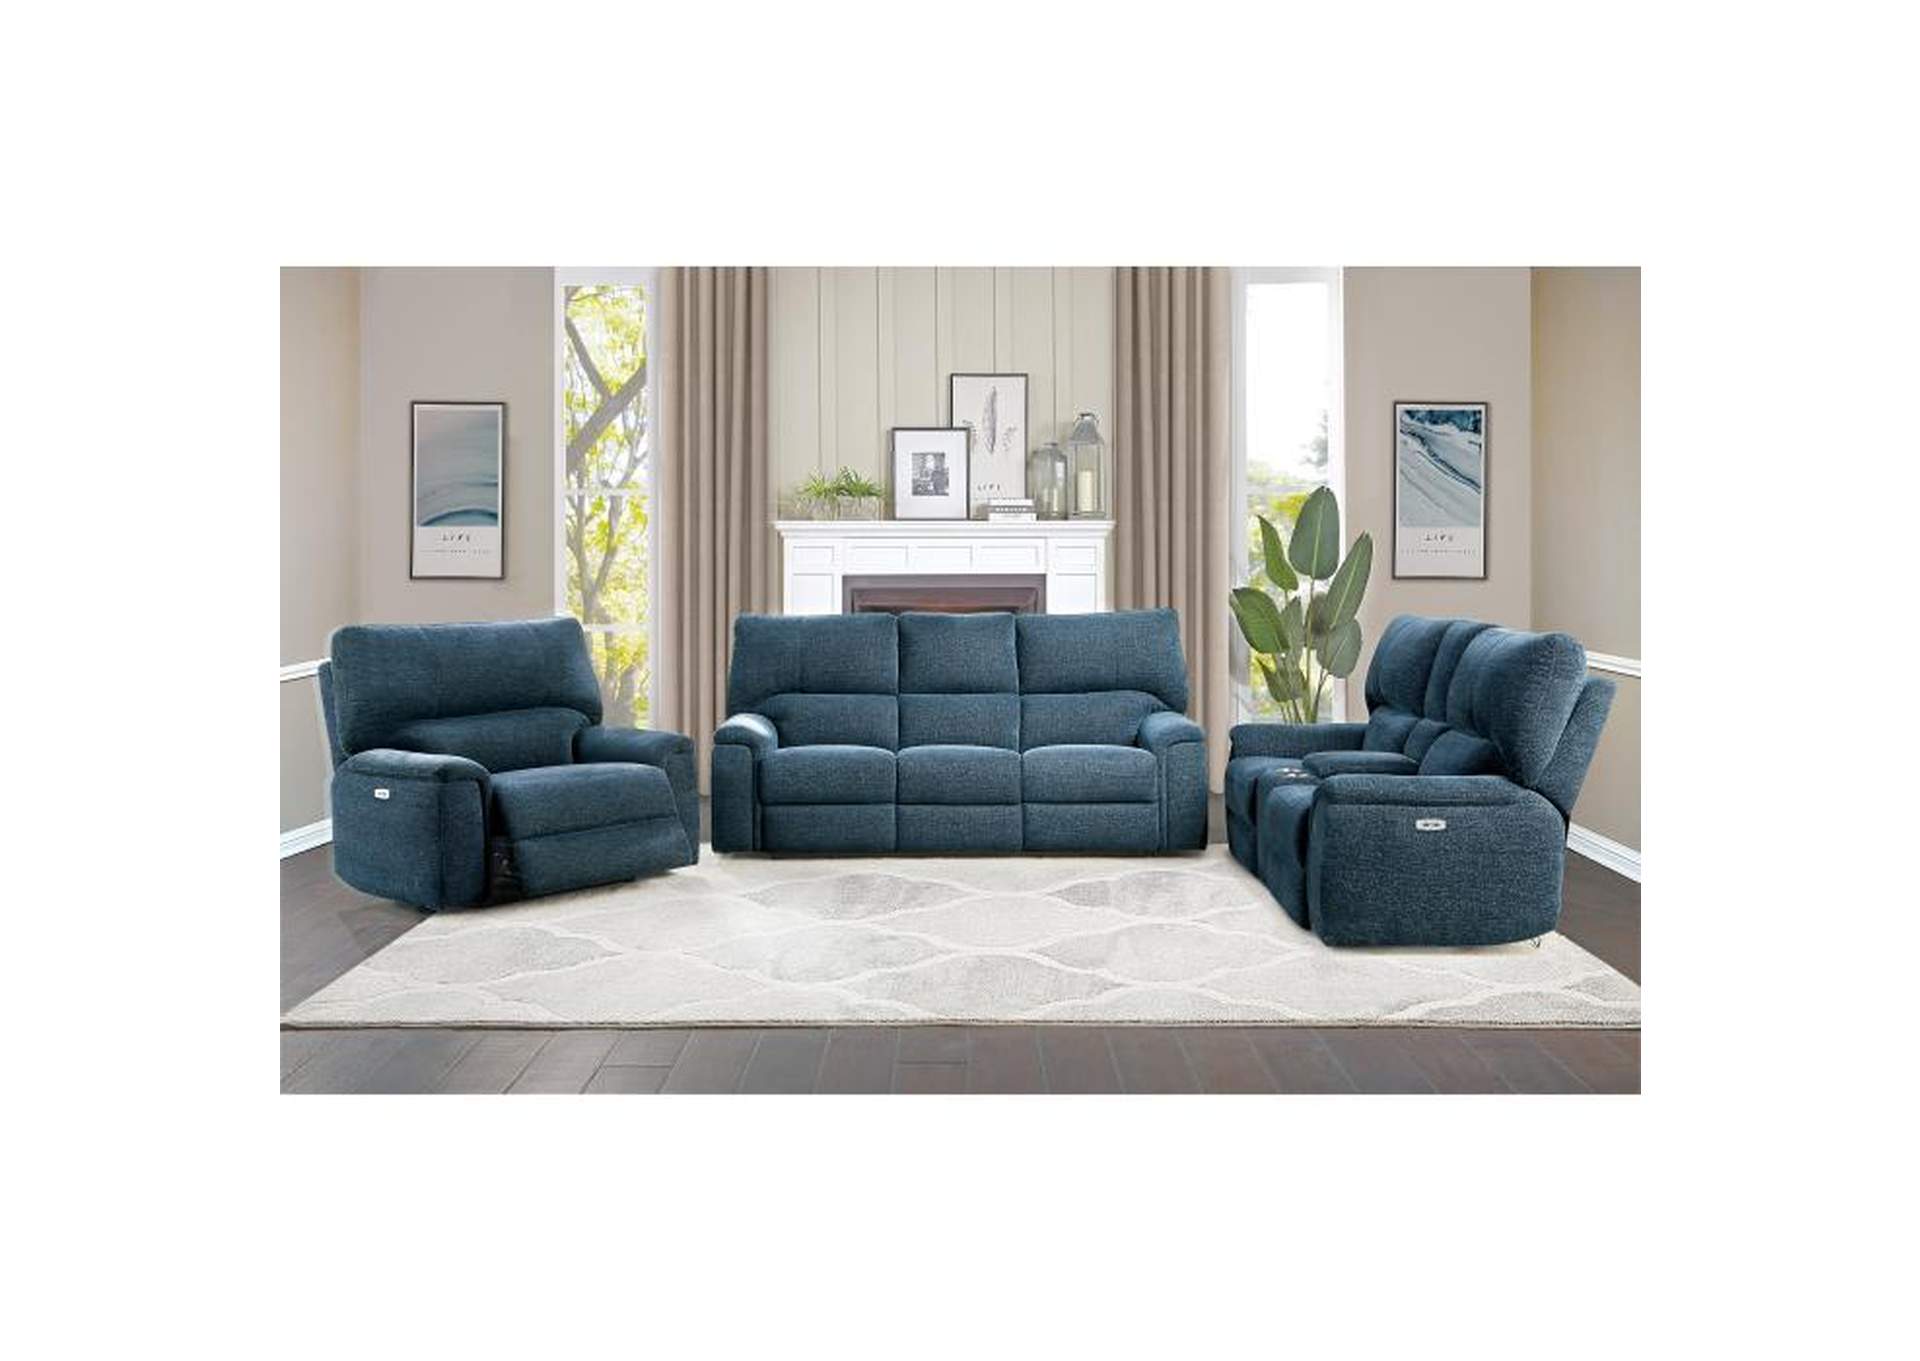 Dickinson Power Double Reclining Sofa With Power Headrests,Homelegance